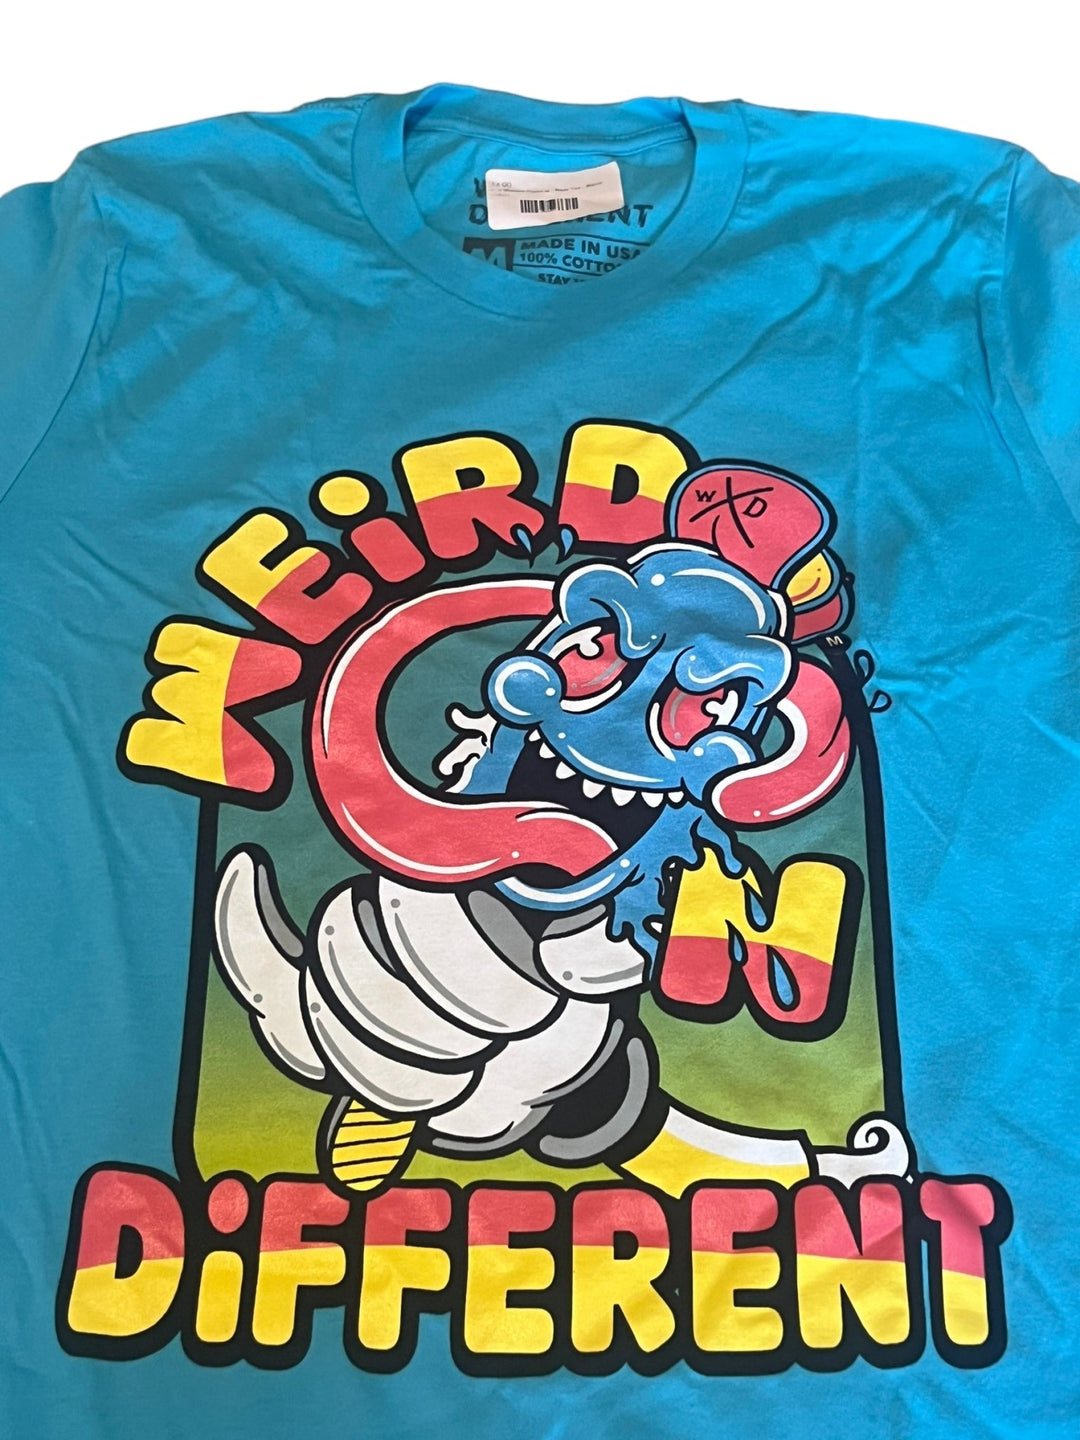 Local Menace Popsicle tee - Weird & Different